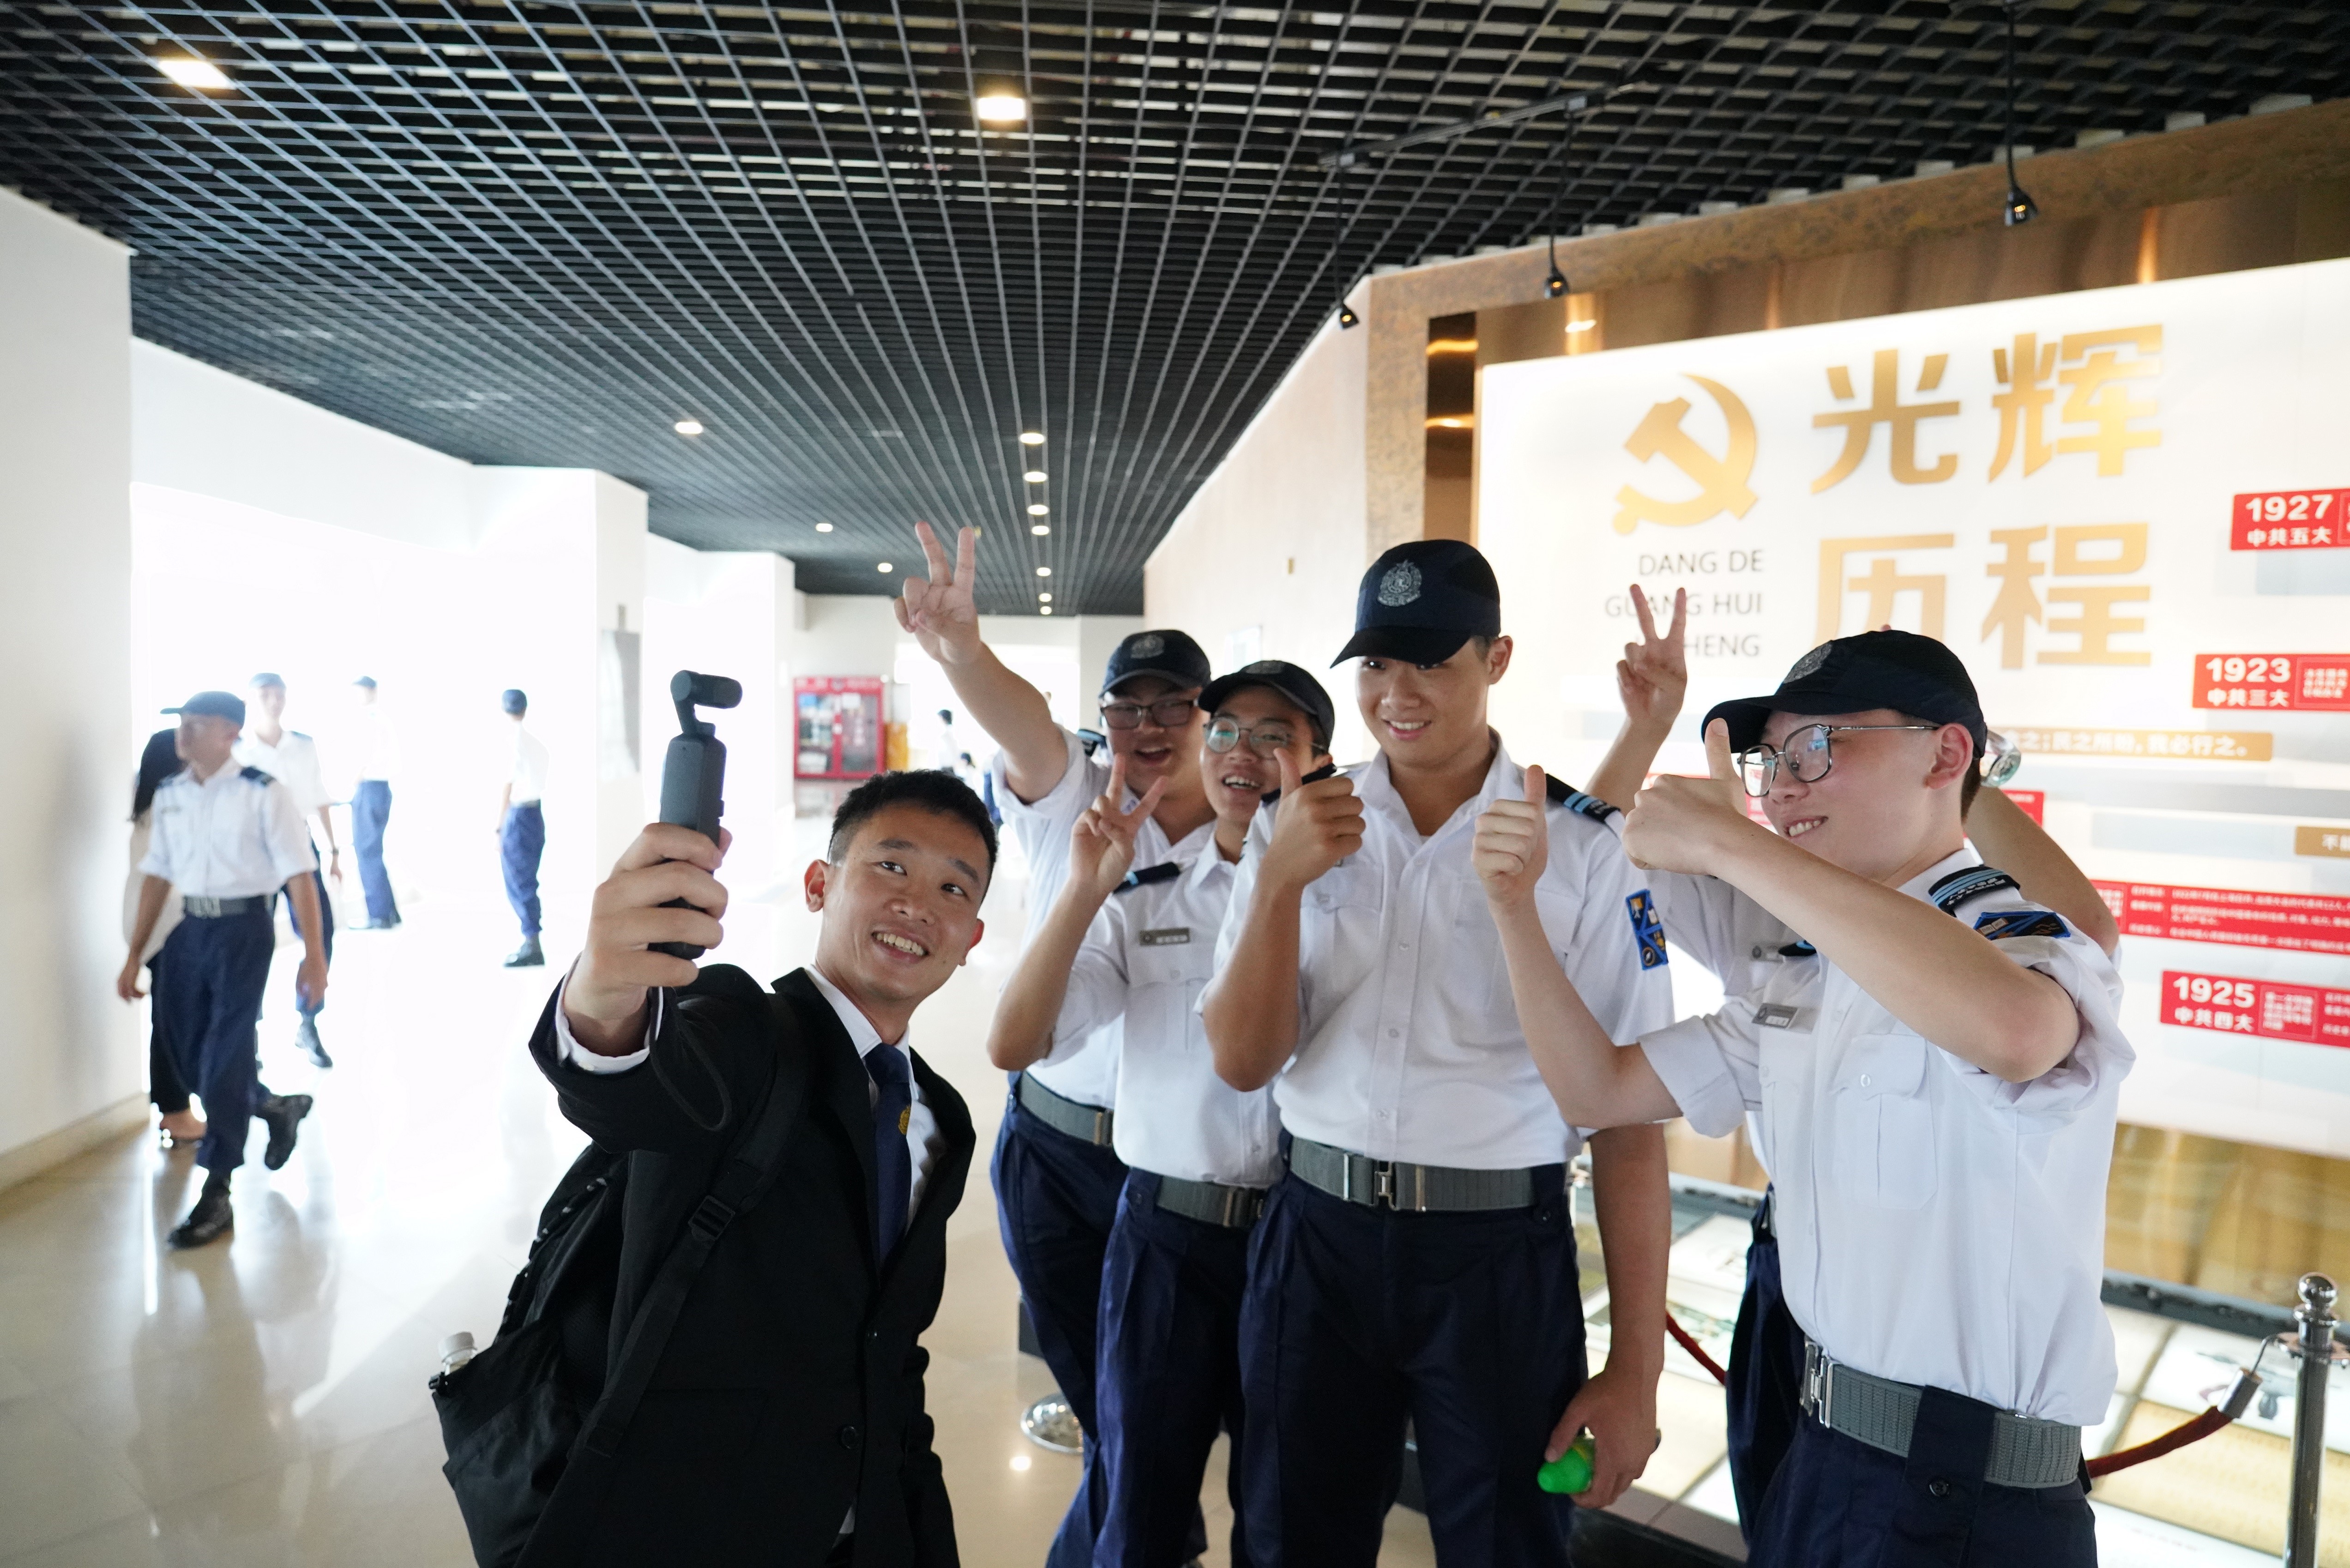 The Immigration Department Youth Leaders Corps members are pictured with a training officer of the Immigration Service Institute of Training and Development in Guangzhou on July 24.